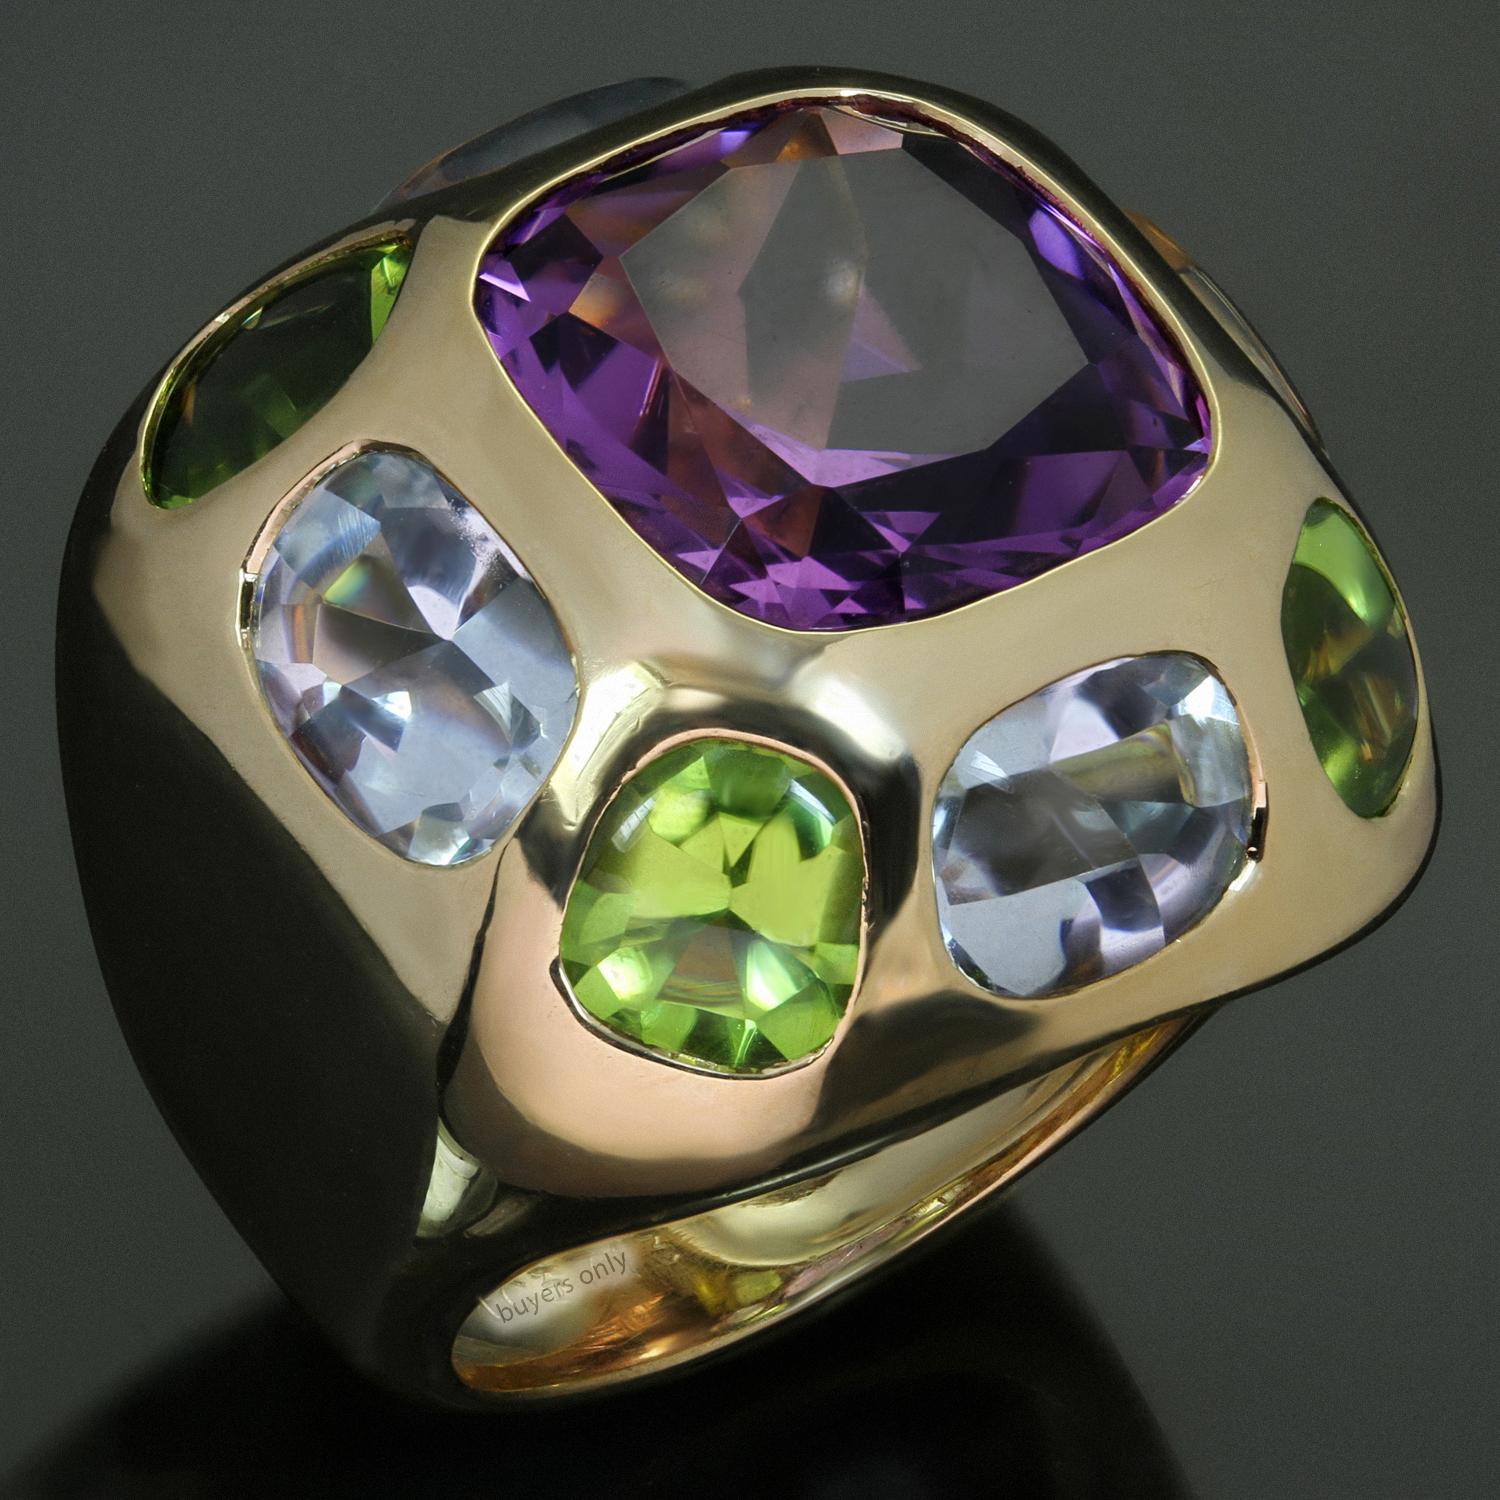 This stunning Chanel cocktail dome band ring from the Coco collection is crafted in 18k yellow gold and features a faceted amethyst in the center surrounded by 4 cabochon peridots and 4 cabochon oval aquamarines. The estimated weight of the